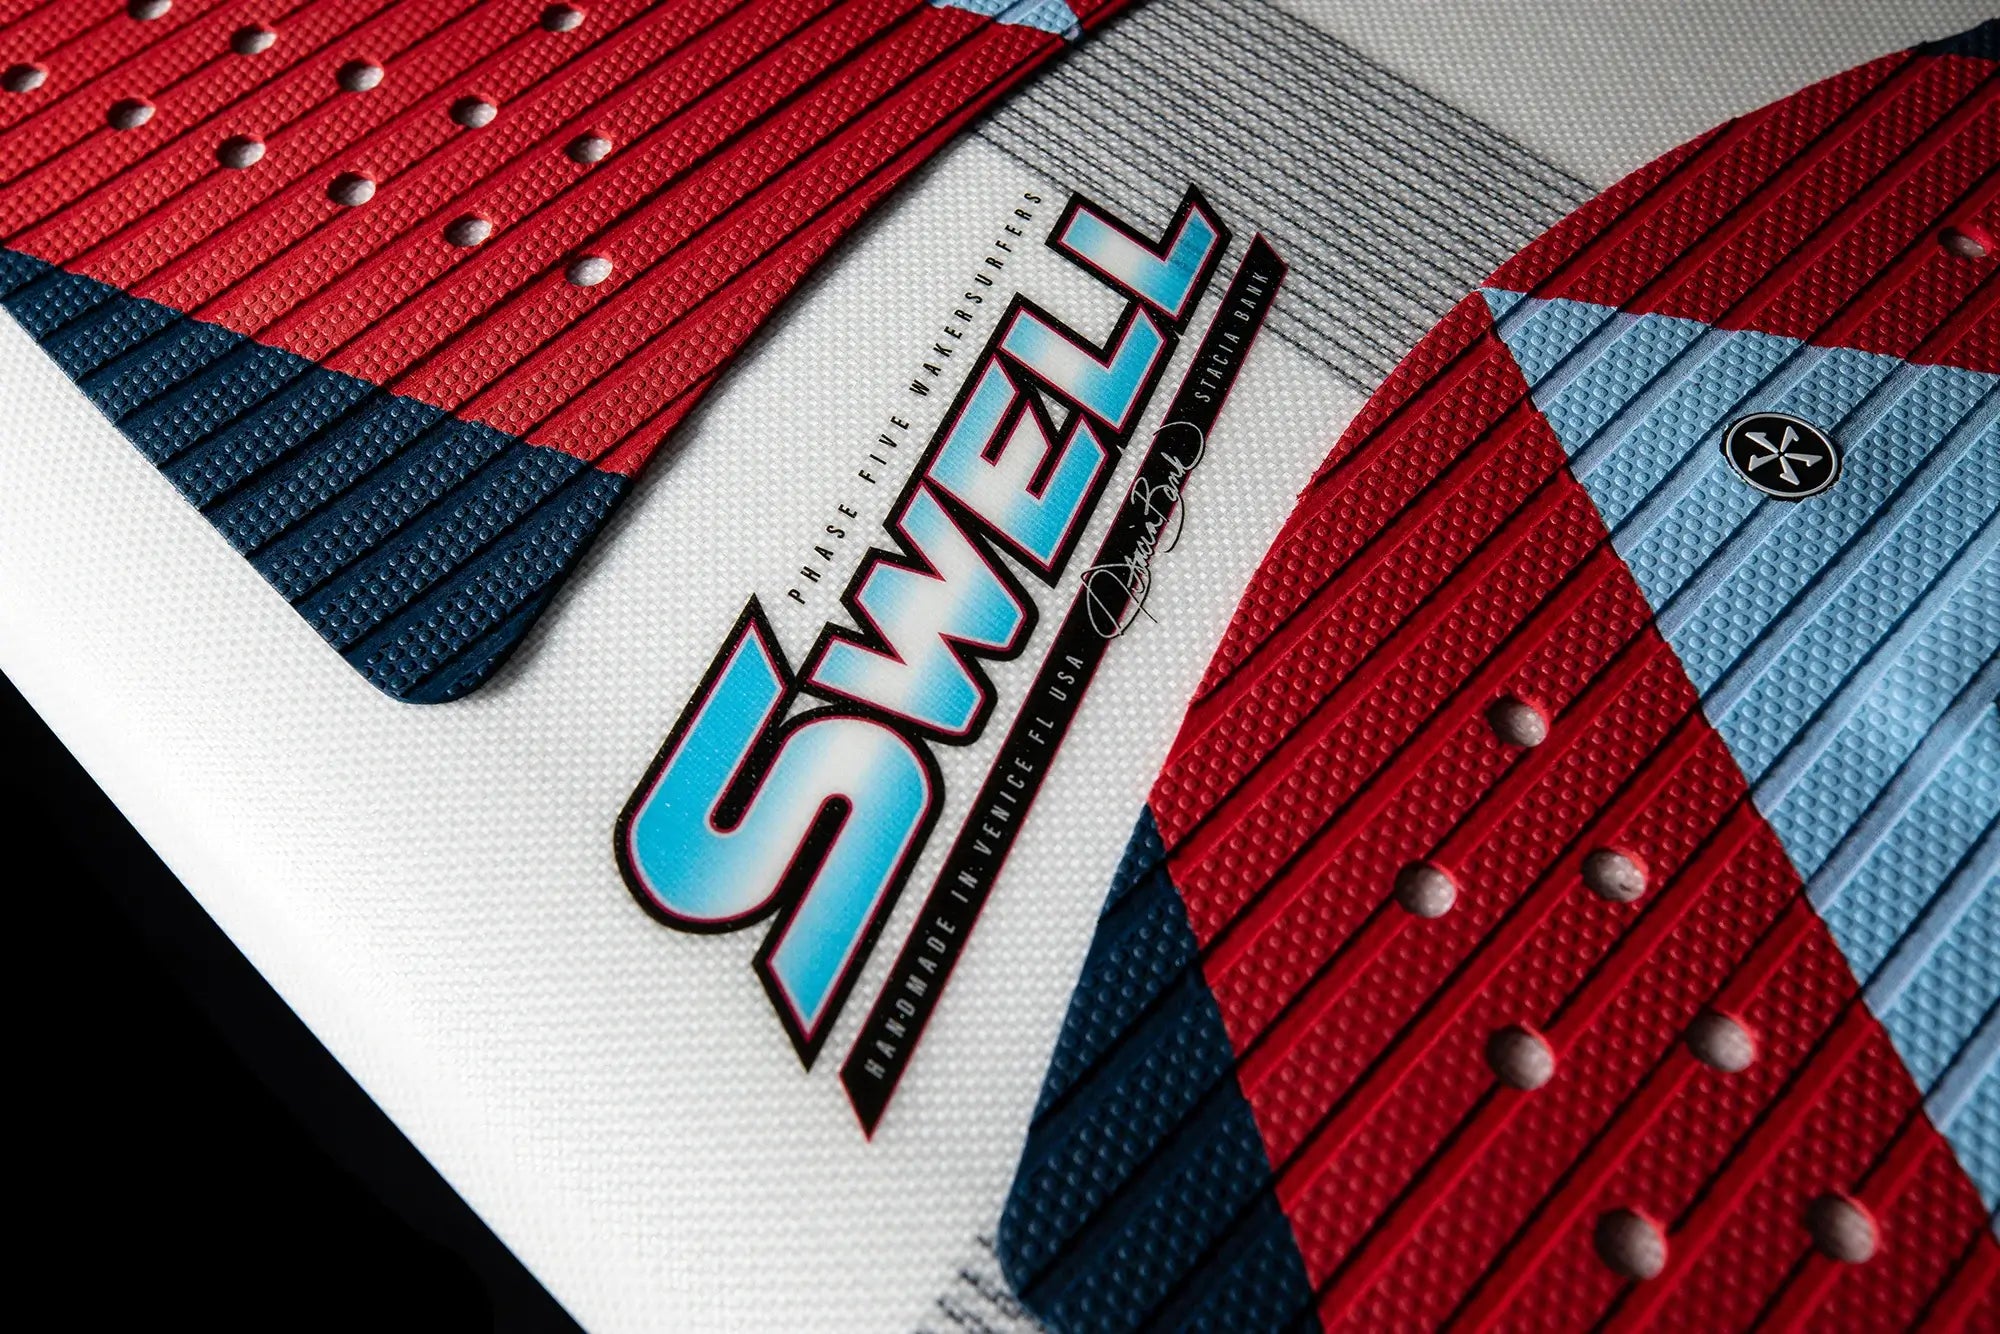 A close up of a Phase 5 Swell Wakesurf Board with a red, blue and white design.